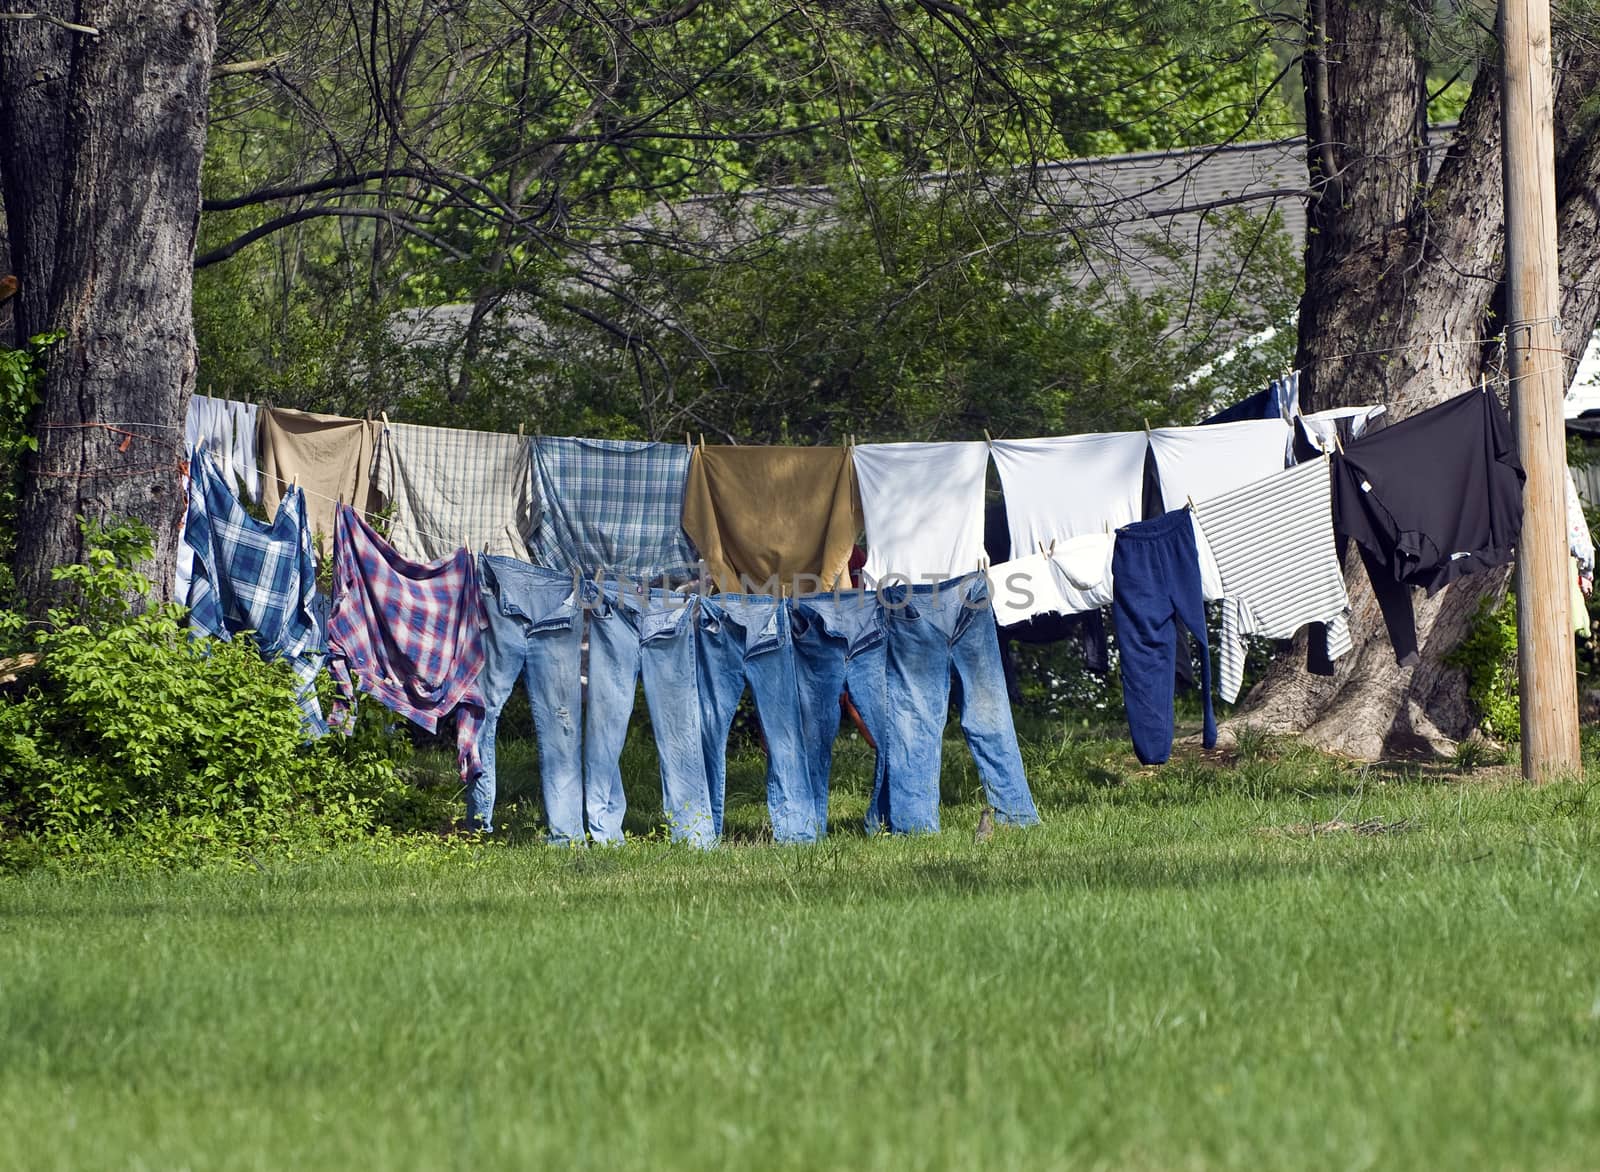 Clothes Hanging Outside On Clothesline by stockbuster1